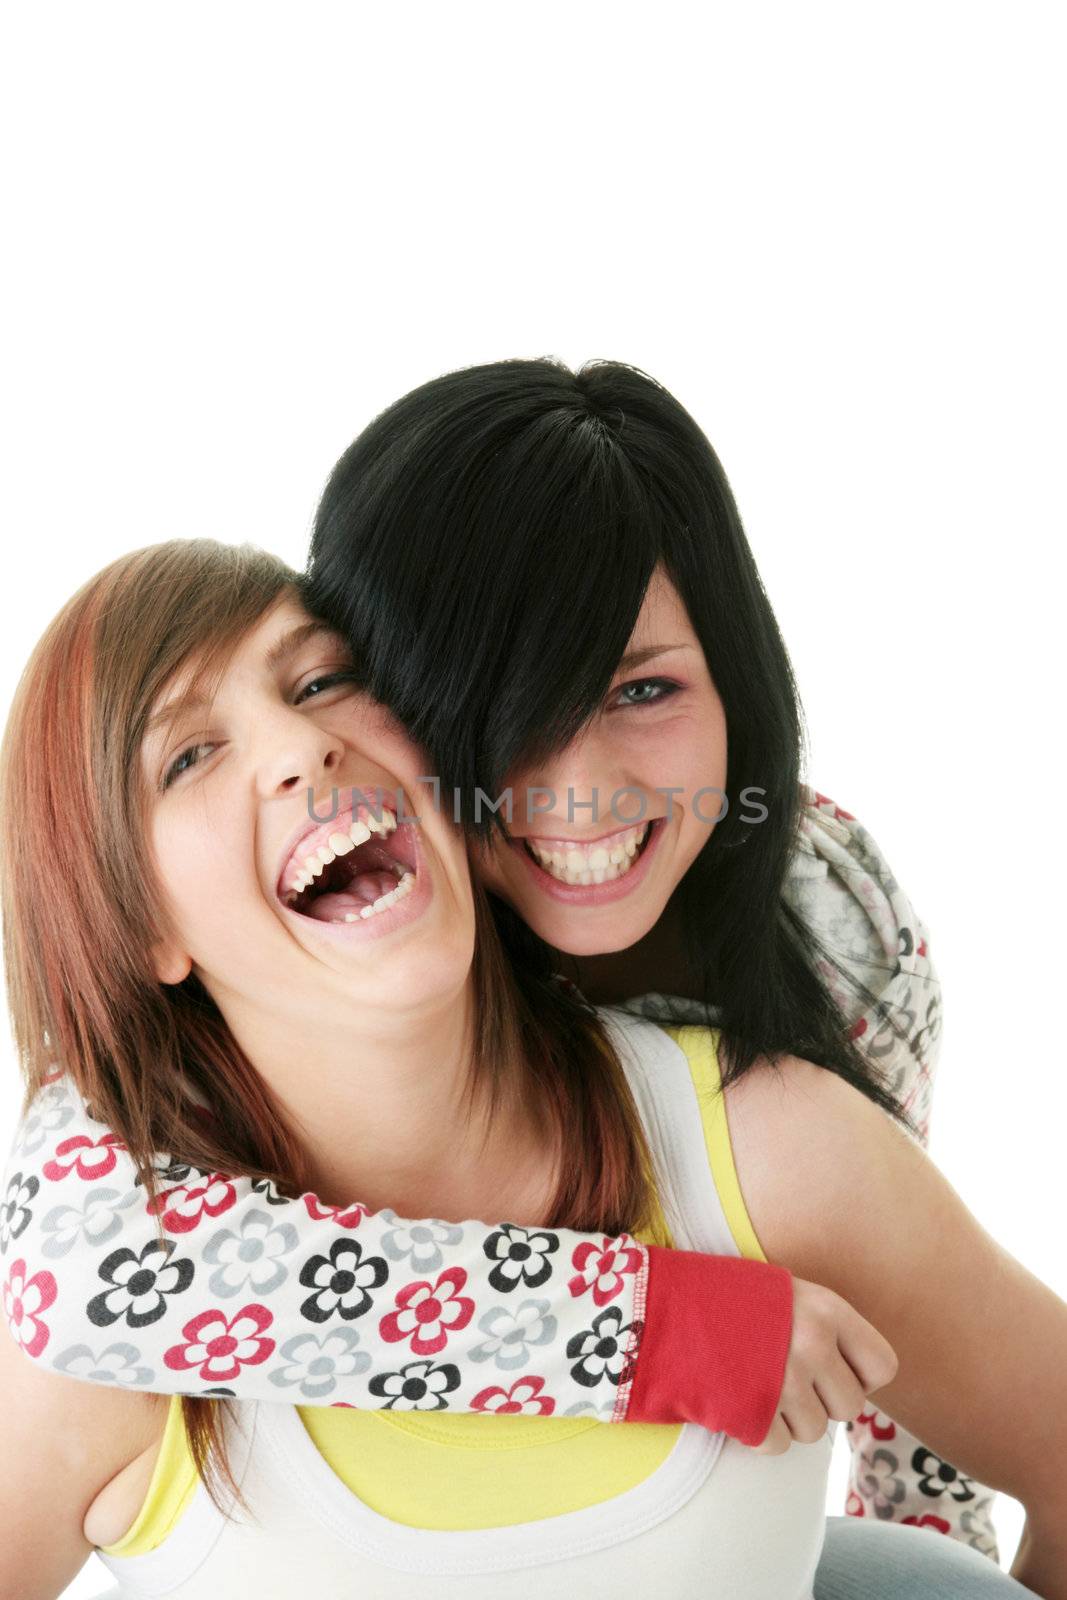 Two teen sisters isolated on white background